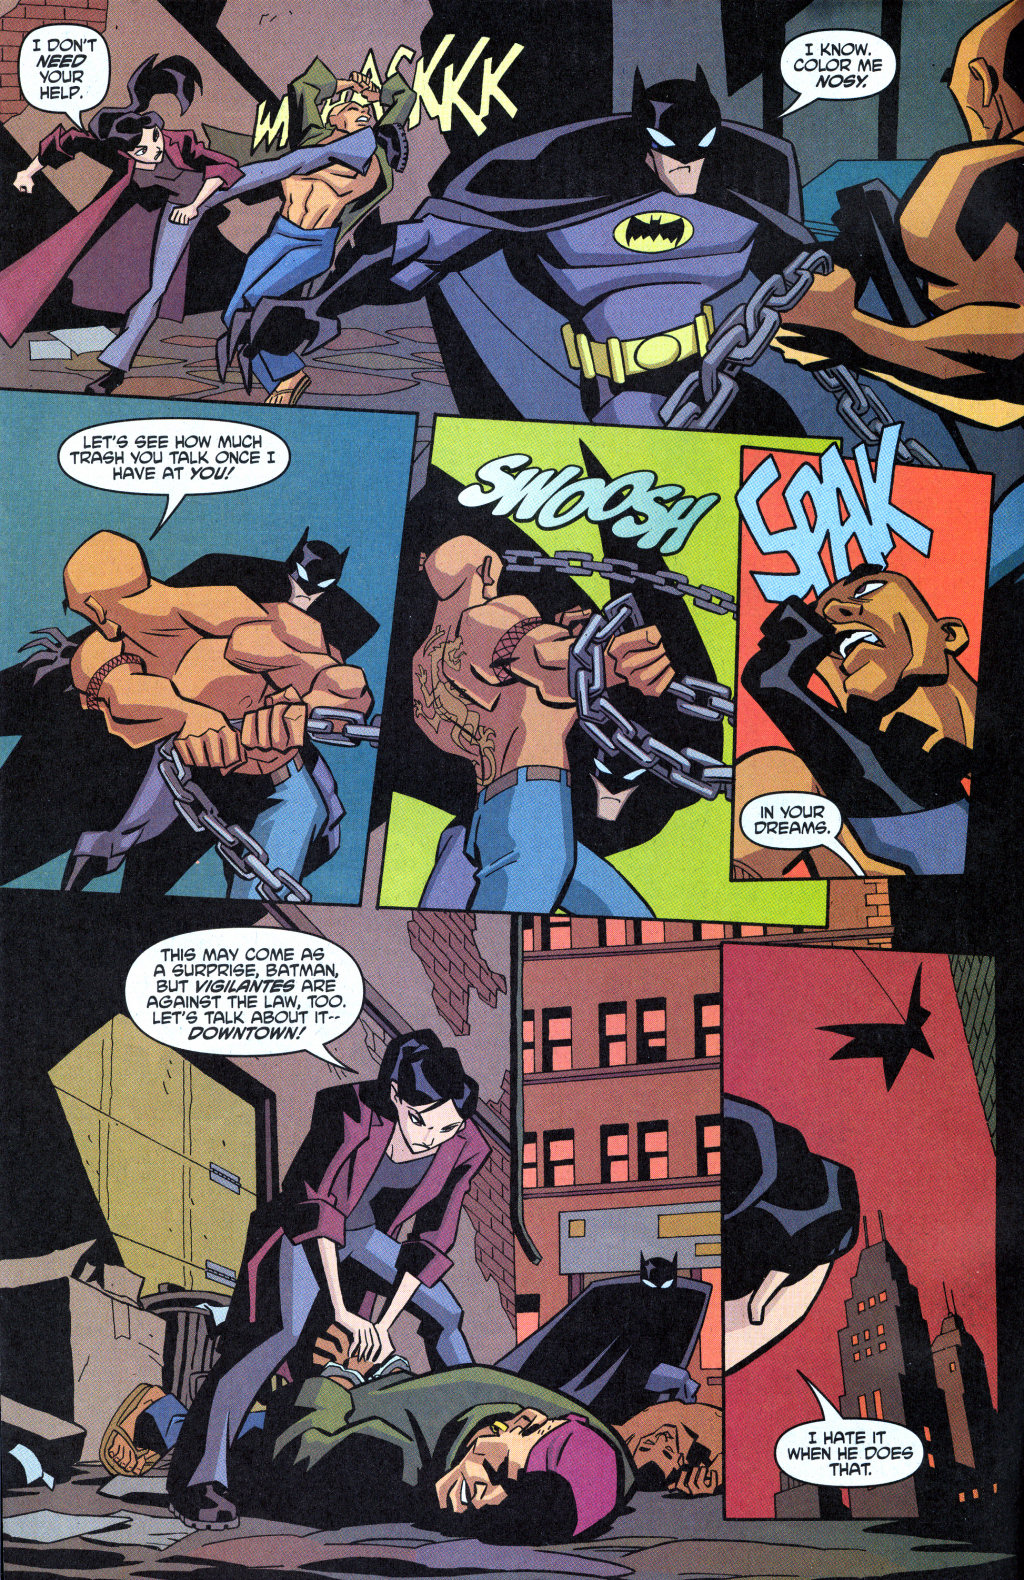 The Batman Strikes! issue 1 (Burger King Giveaway Edition) - Page 4